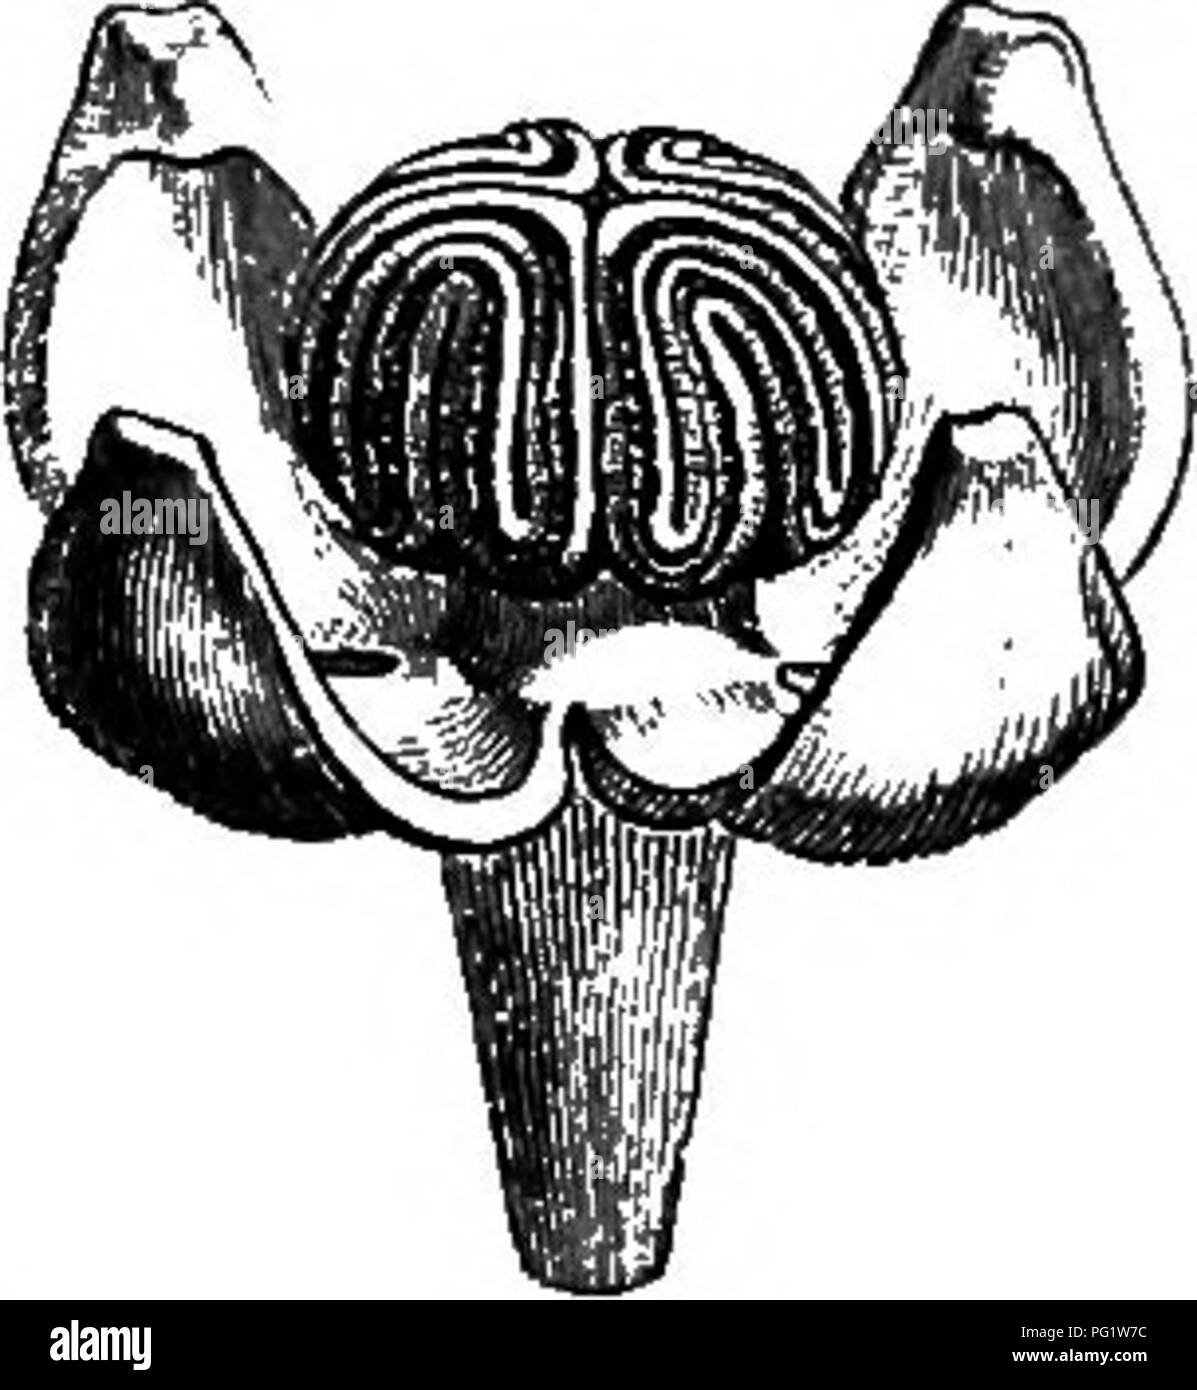 . The natural history of plants. Botany. LIX. BALANOPHORACE^. This family, the limits of wliich. have been greatly extended, owes its name to the genus Balanophora' (fig. 482-485), in which the Balanophora dioica.. Fig. 483. Male flower. gynsecium much resembles, in its organization, that of Eippuris. The flowers are unisexual, monoe- cious, or dioecious. In the males (fig. 482-485), the perianth has from three to six ^ and often four valvate divisions,^ above which the receptacle is produced in a small column which bears extrorse an- thers. They are either the same in number as the parts to w Stock Photo